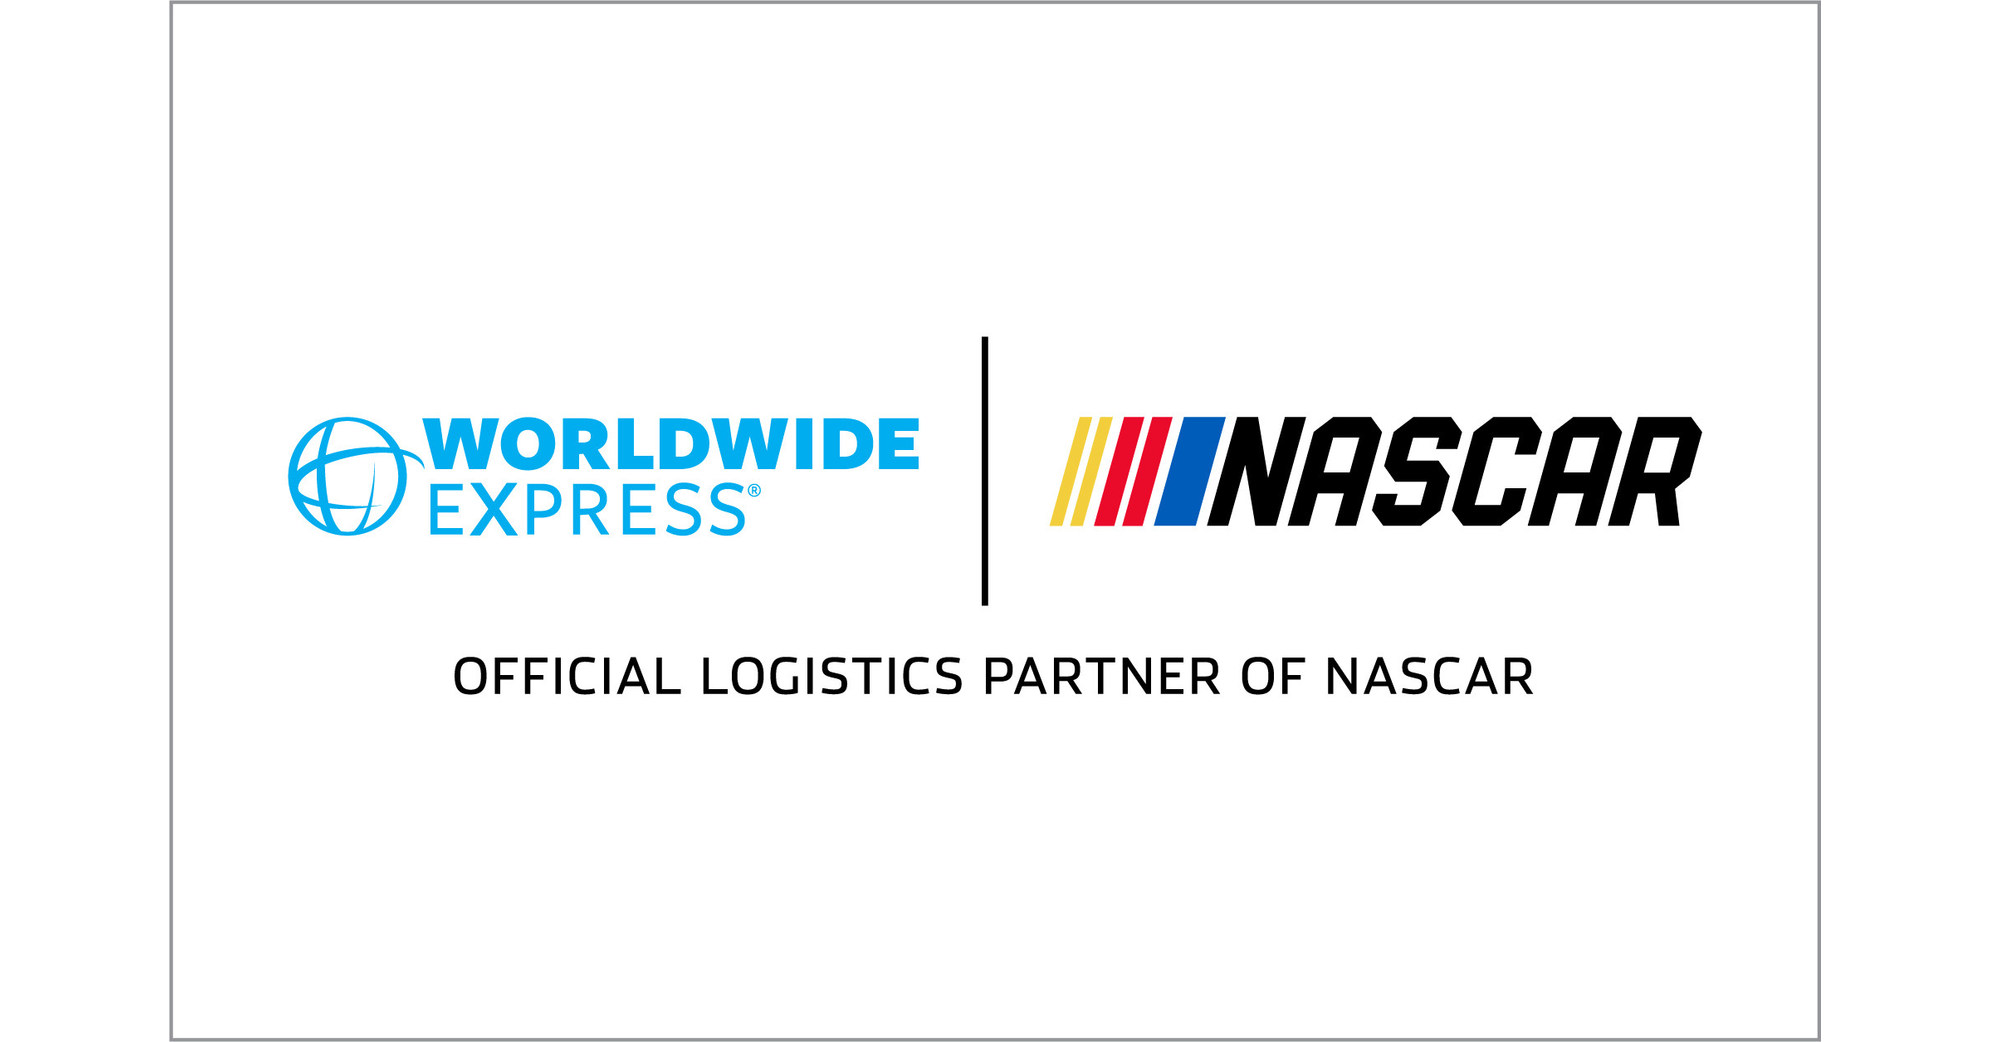 Worldwide Express Expands NASCAR Presence and Becomes Official Logistics  Partner